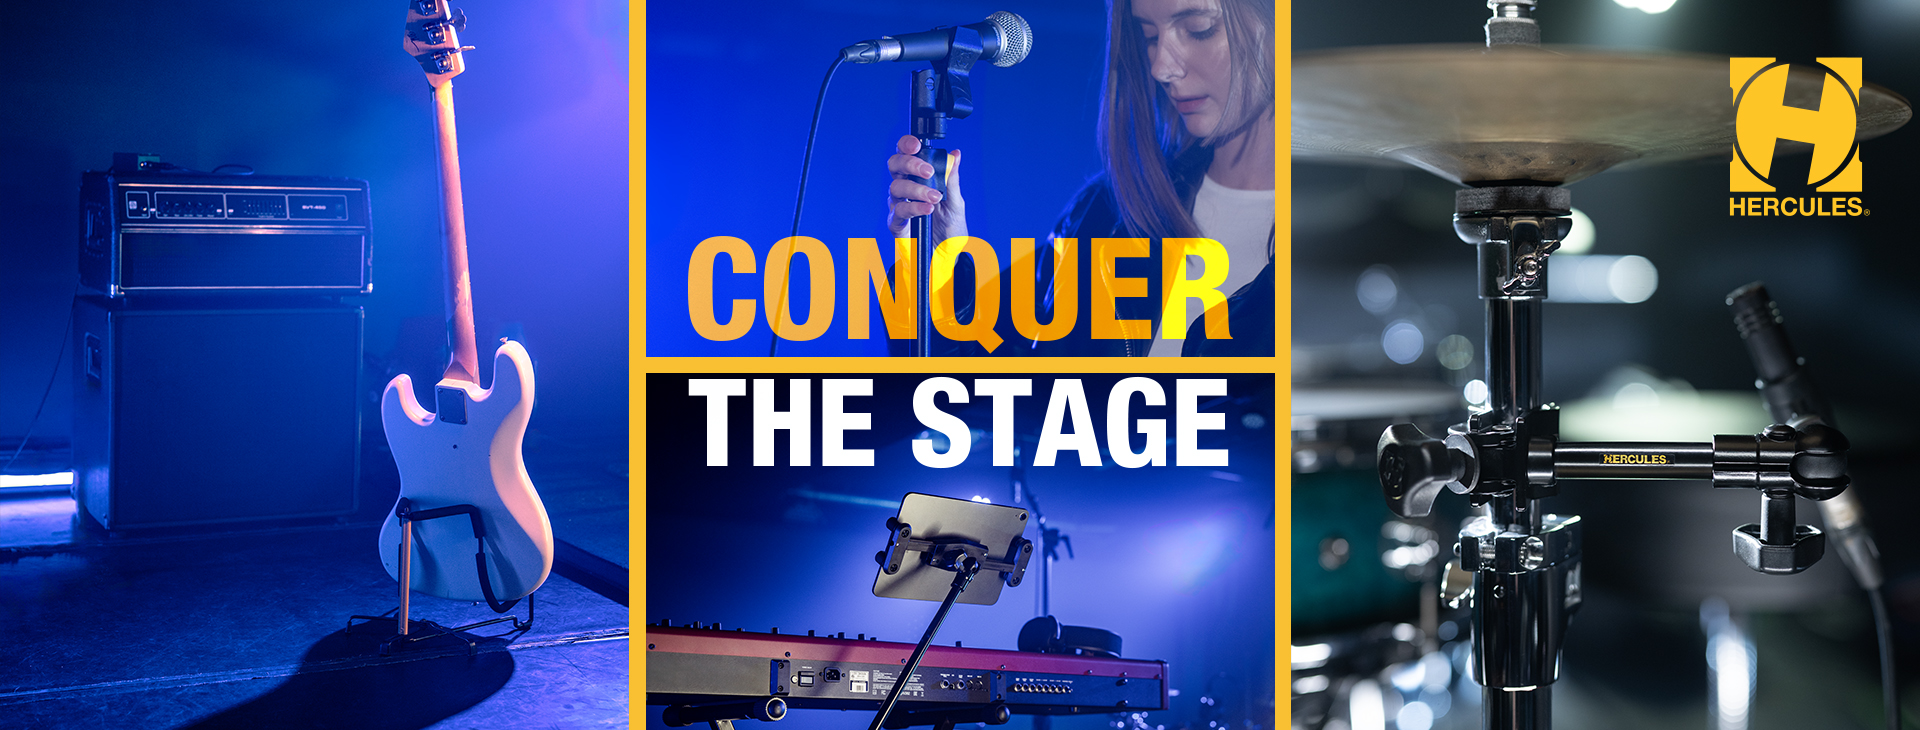 Conquer the Stage